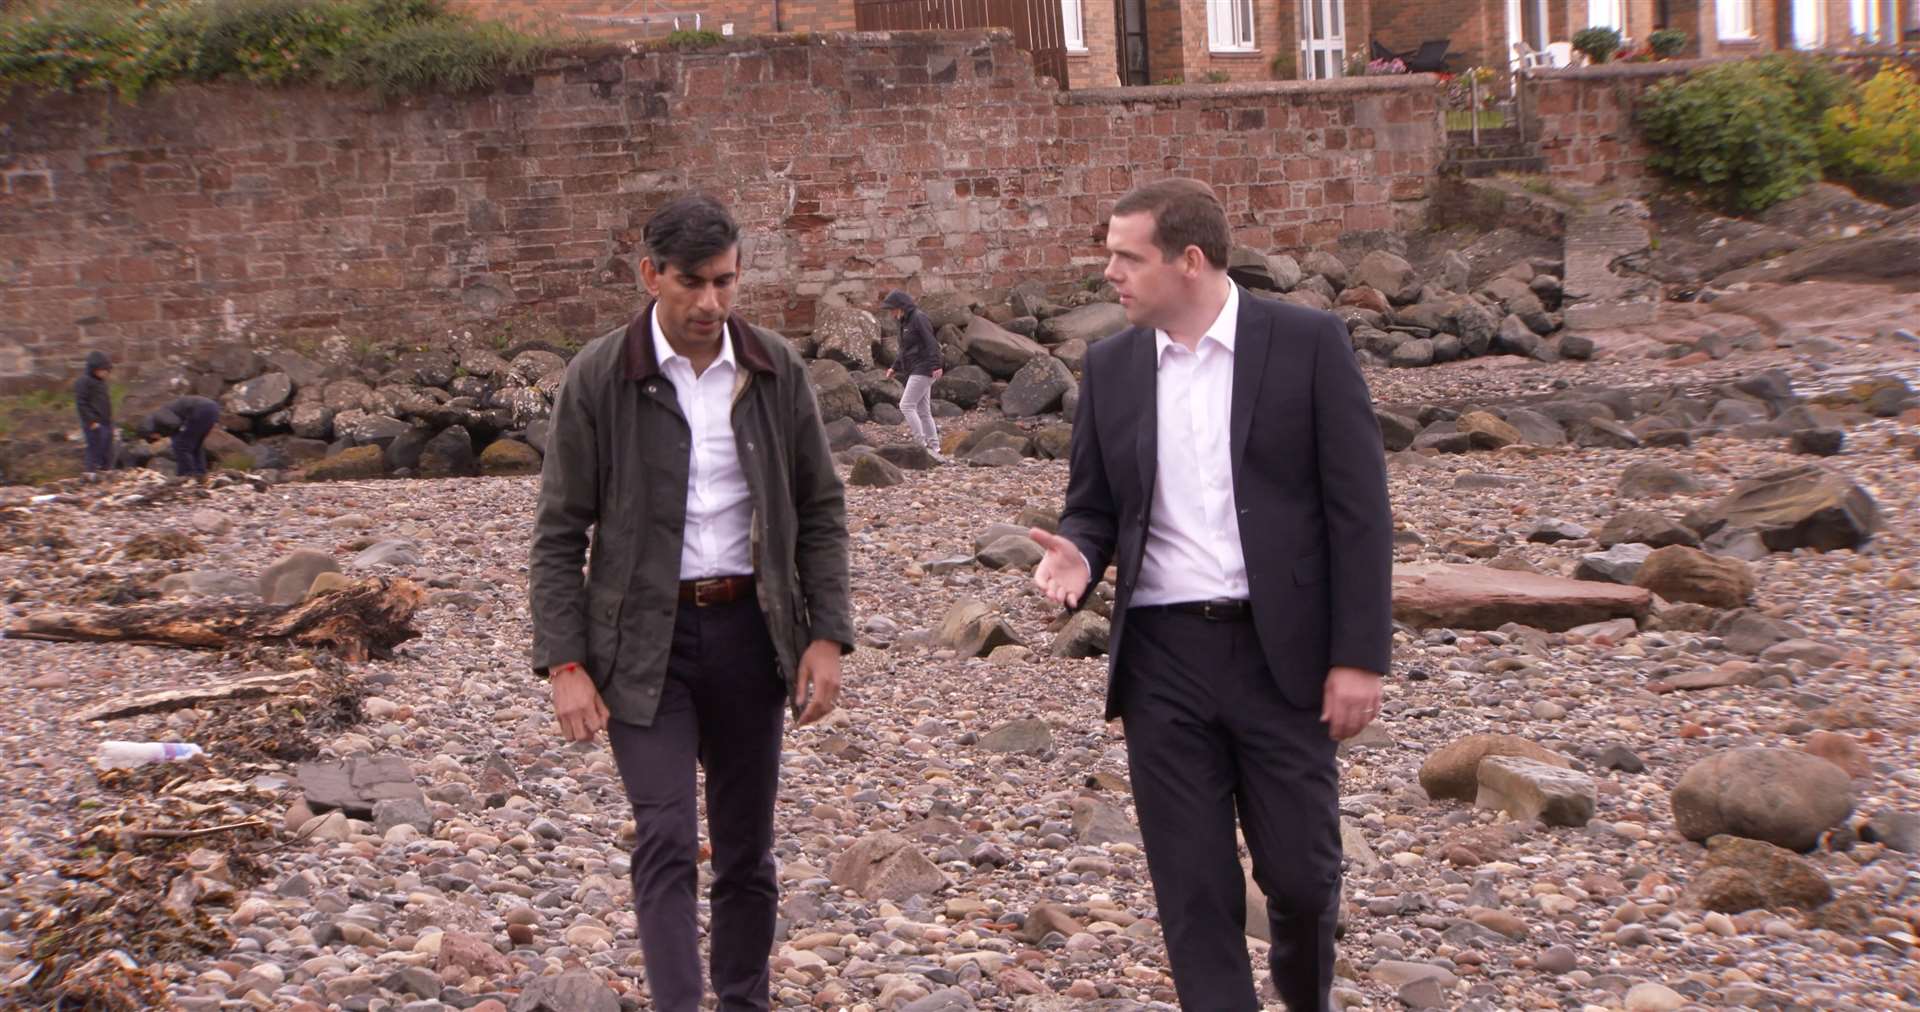 Moray MP and Scots Tory leader Douglas Ross (right) welcomes Chancellor of the Exchequer Rishni Sunak to Scotland. Picture: Moray Conservatives